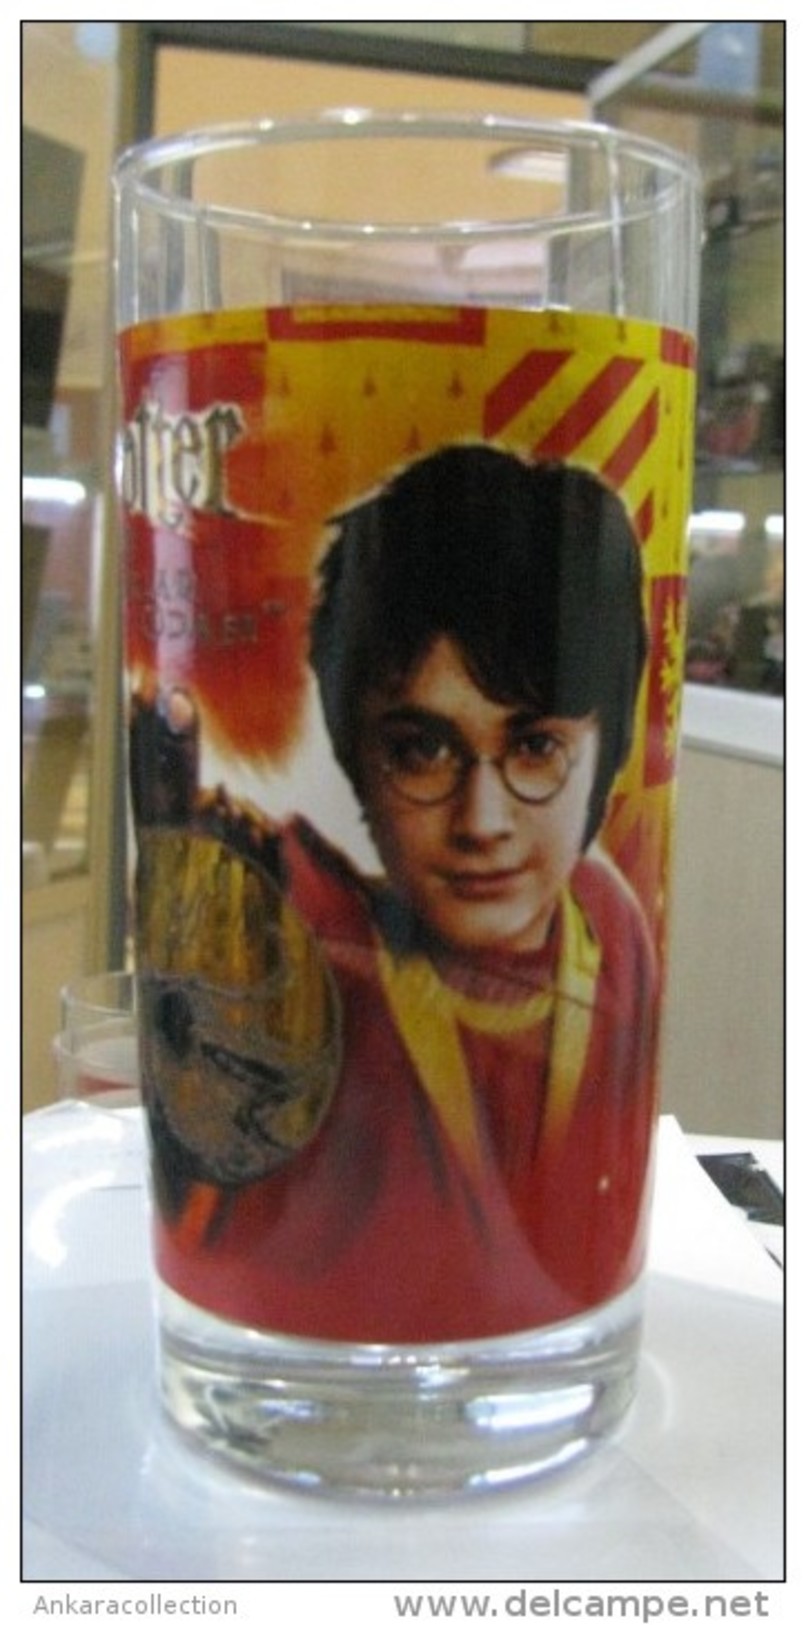 AC - COCA COLA HARRY POTTER AND THE CHAMBER OF SECRETS TUMBLER GLASS FROM TURKEY - Kopjes, Bekers & Glazen